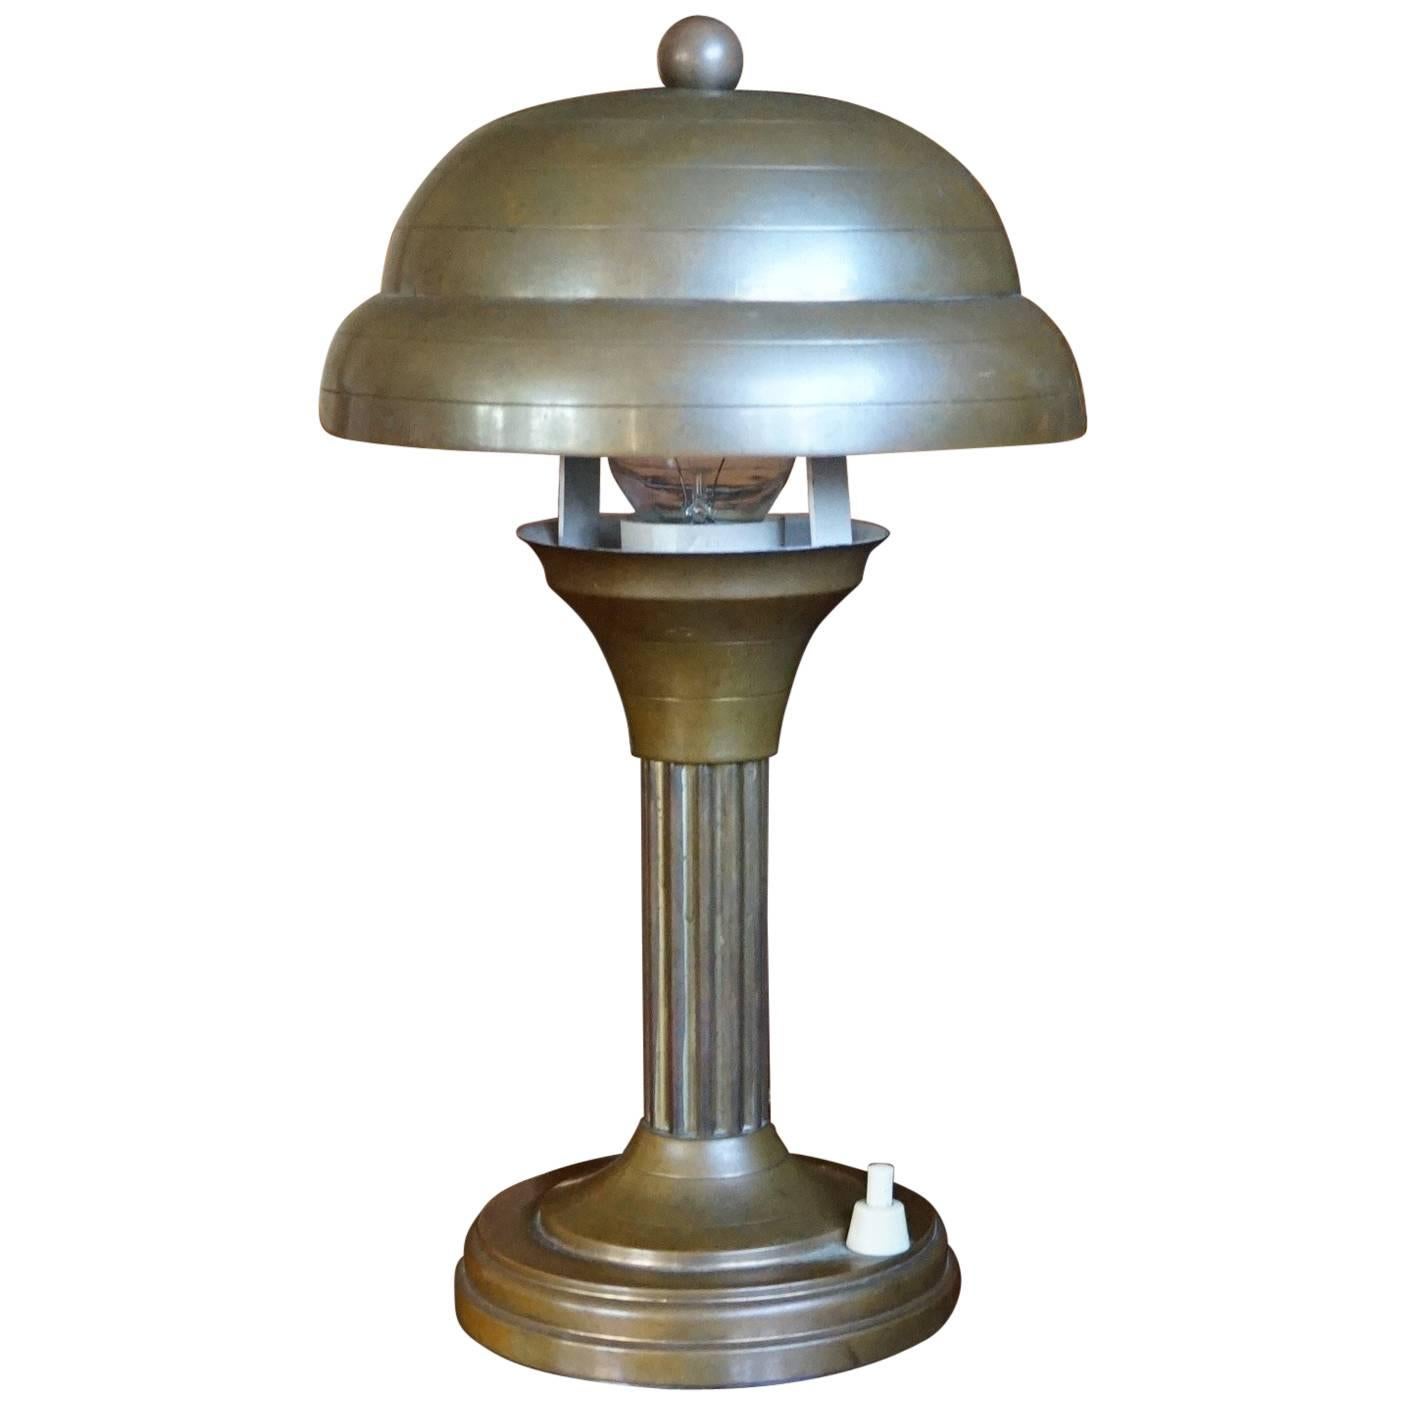 Stylish and Handcrafted Copper Metal Art Deco Table or Desk Lamp